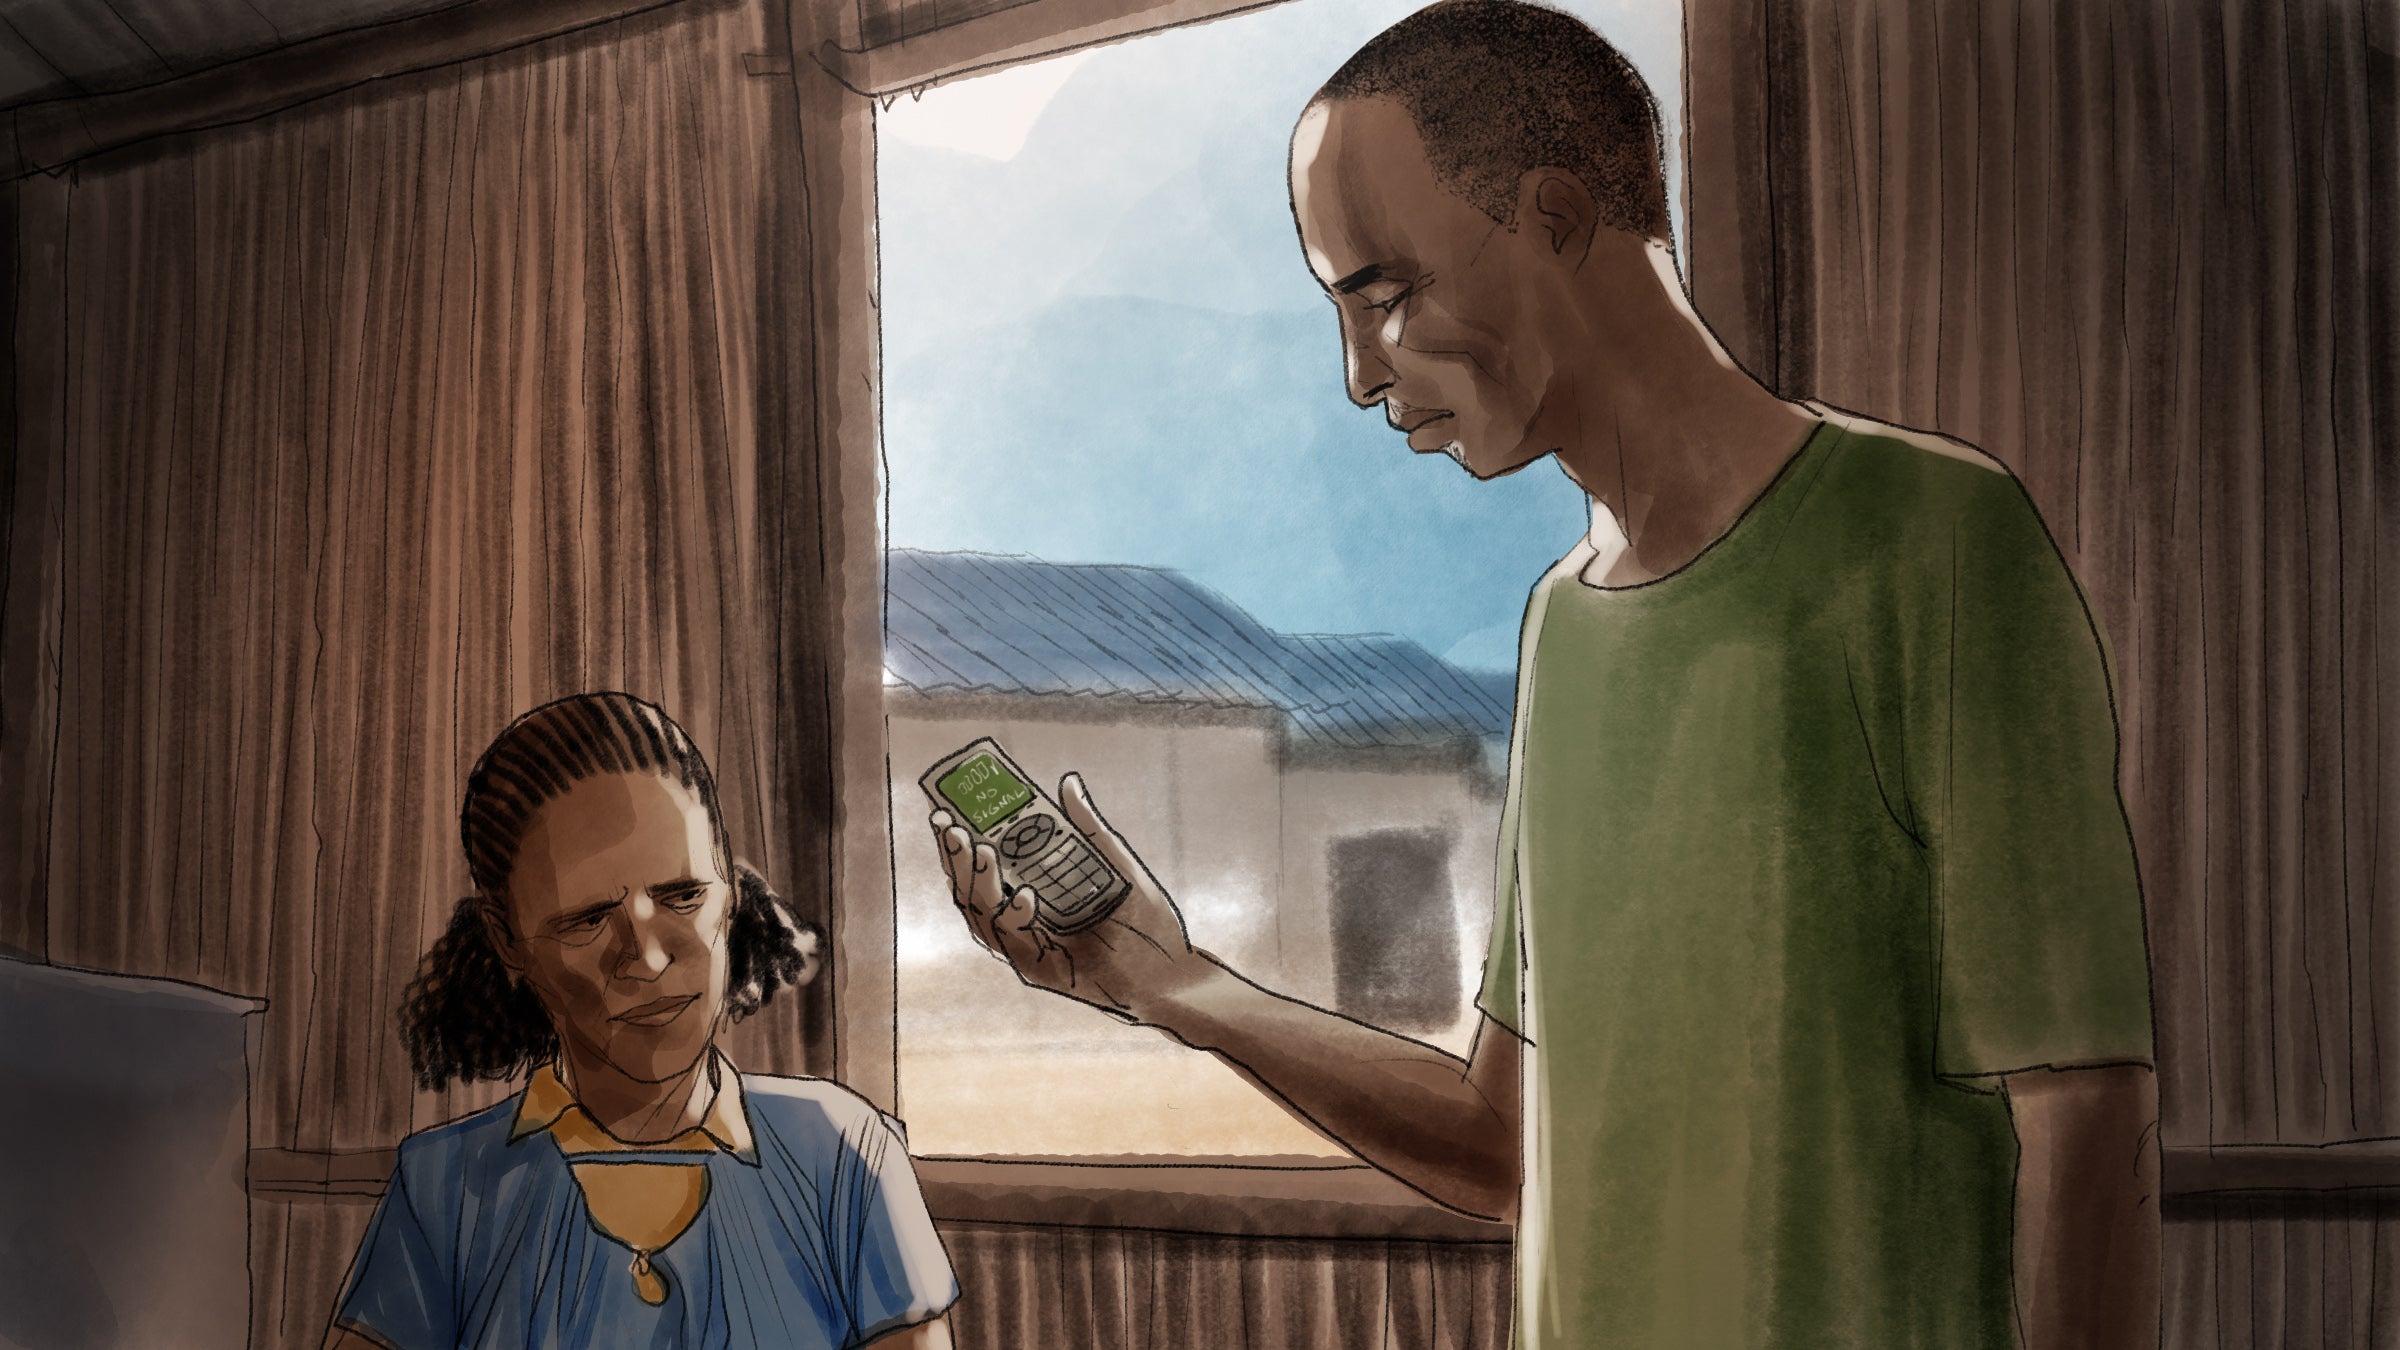 Illustration of a man and woman holding a cell phone